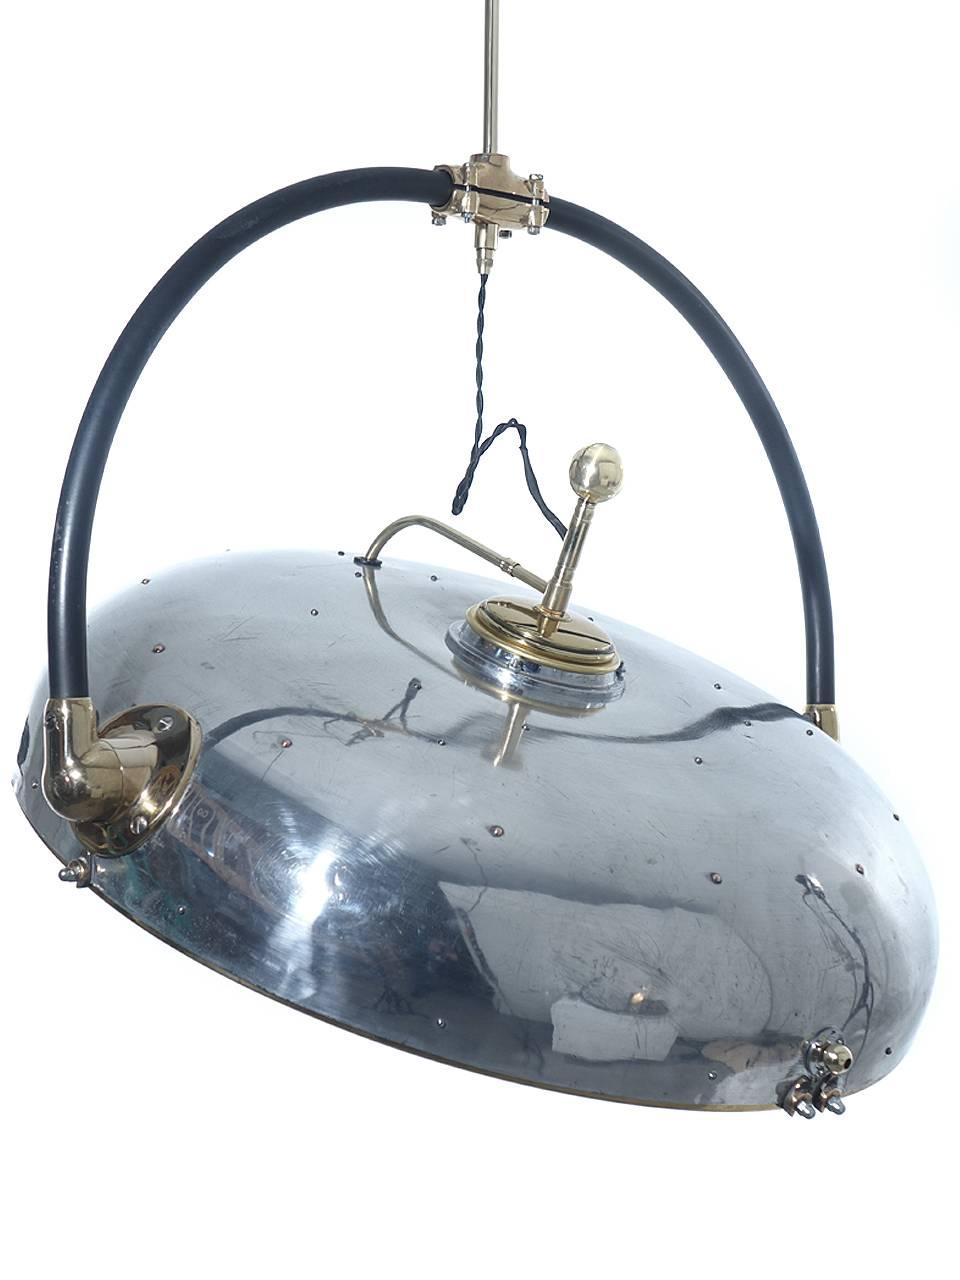 Memorizing French “Scialytique” 50 Mirror Operating Room Lamp 2